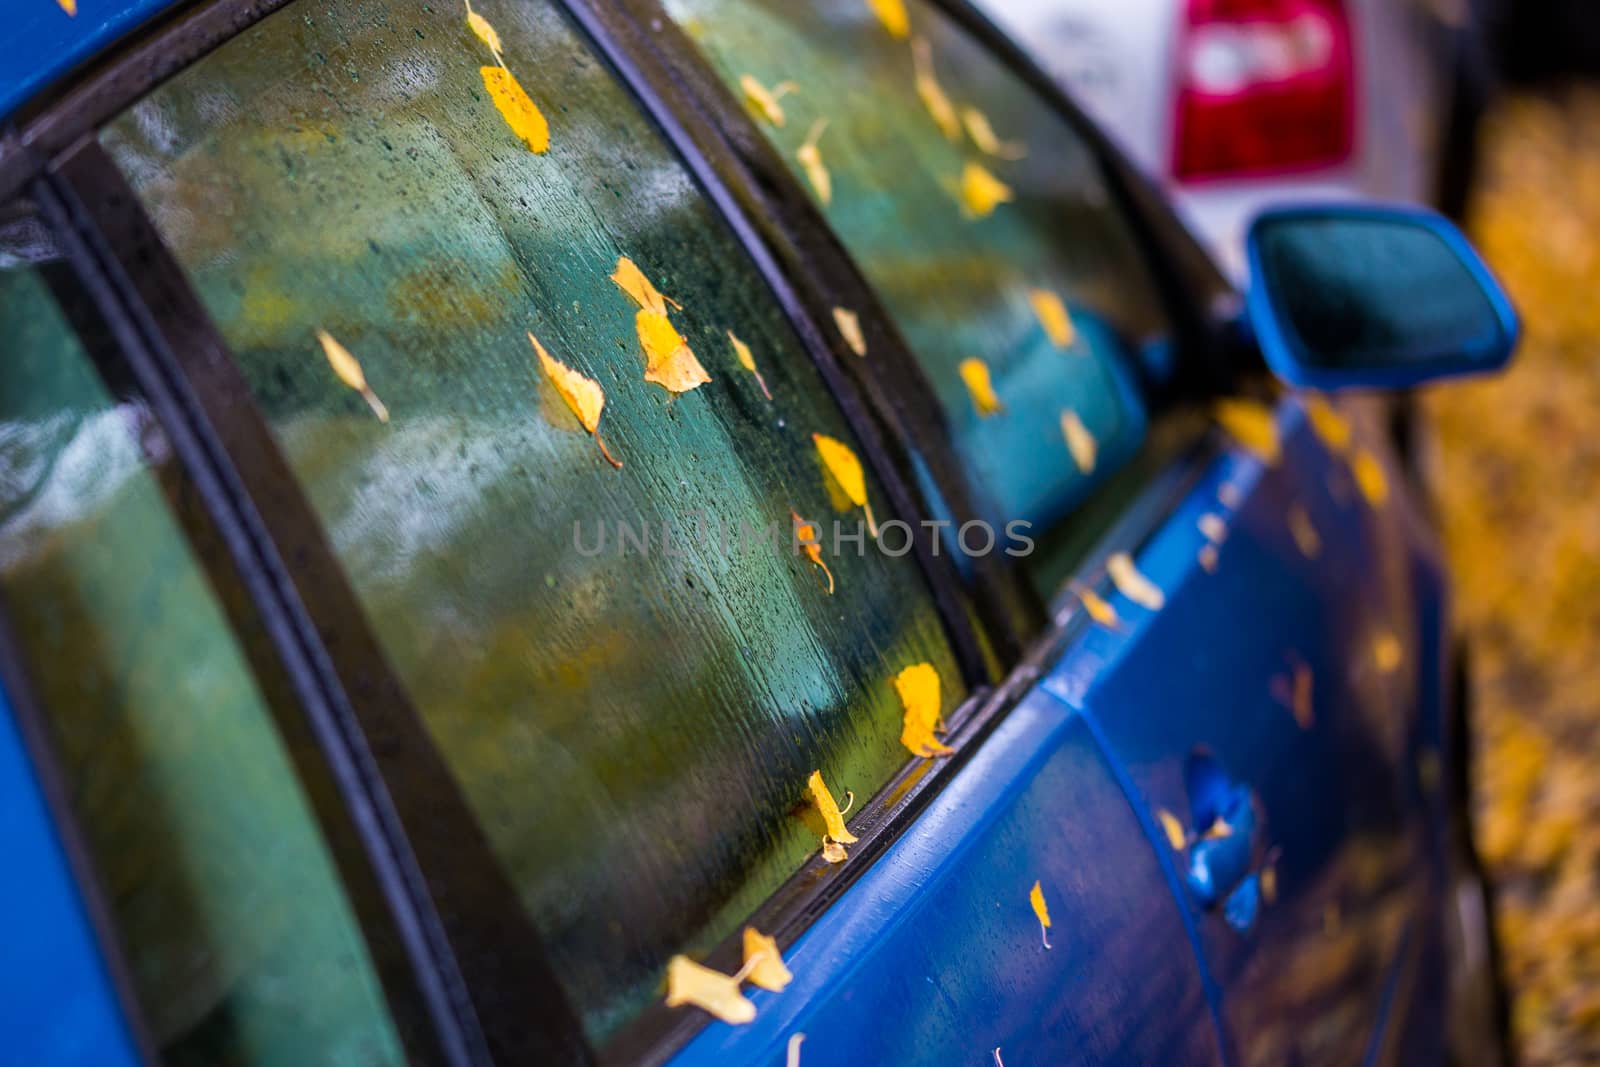 wet ultramarine blue car side at cloudy daylight with autumn leaves and selective focus